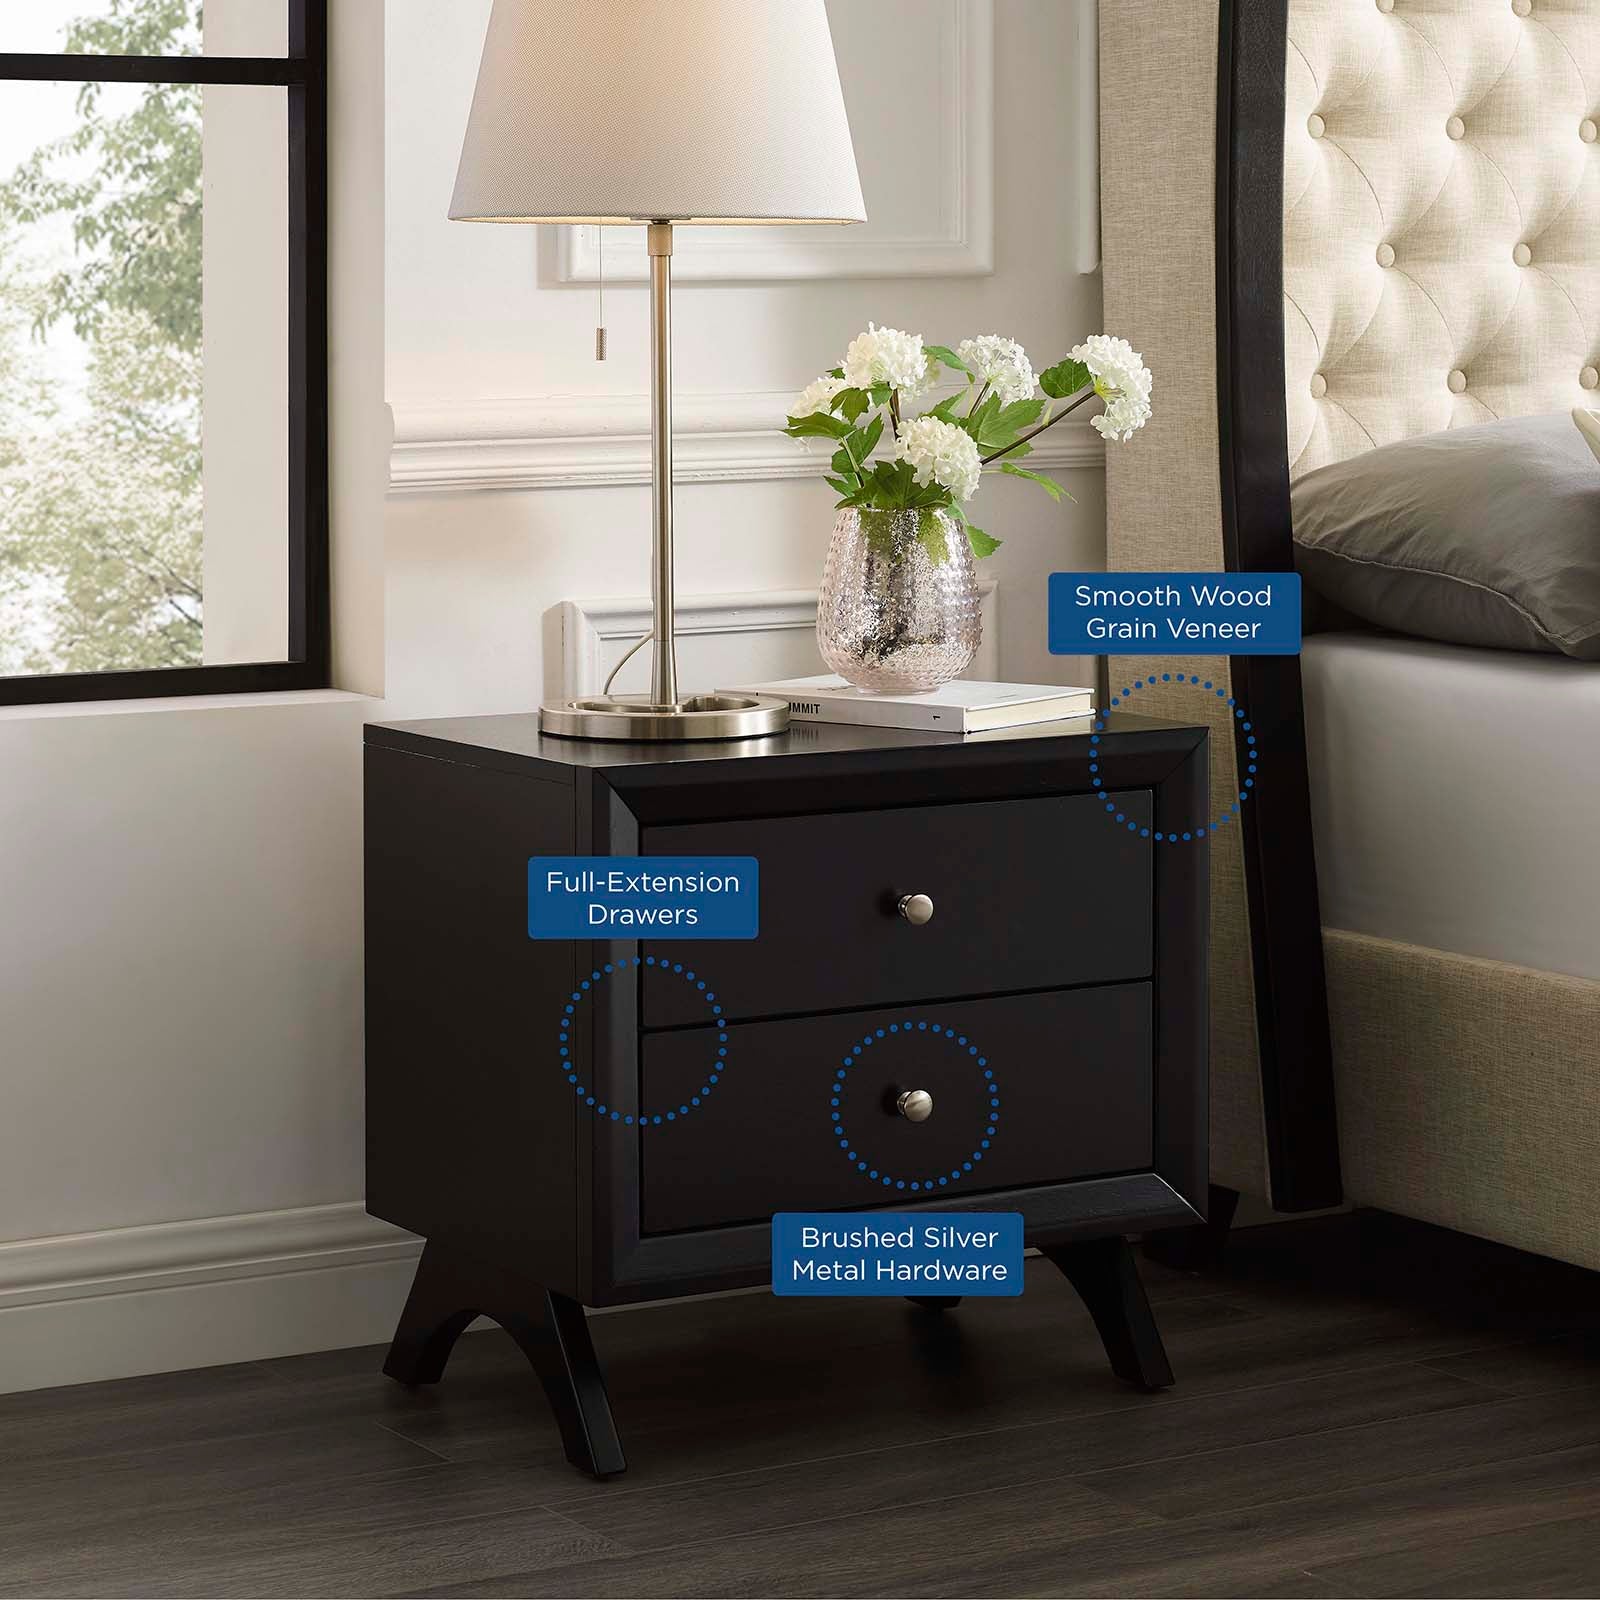 Modway Nightstands & Side Tables - Providence Nightstand Walnut